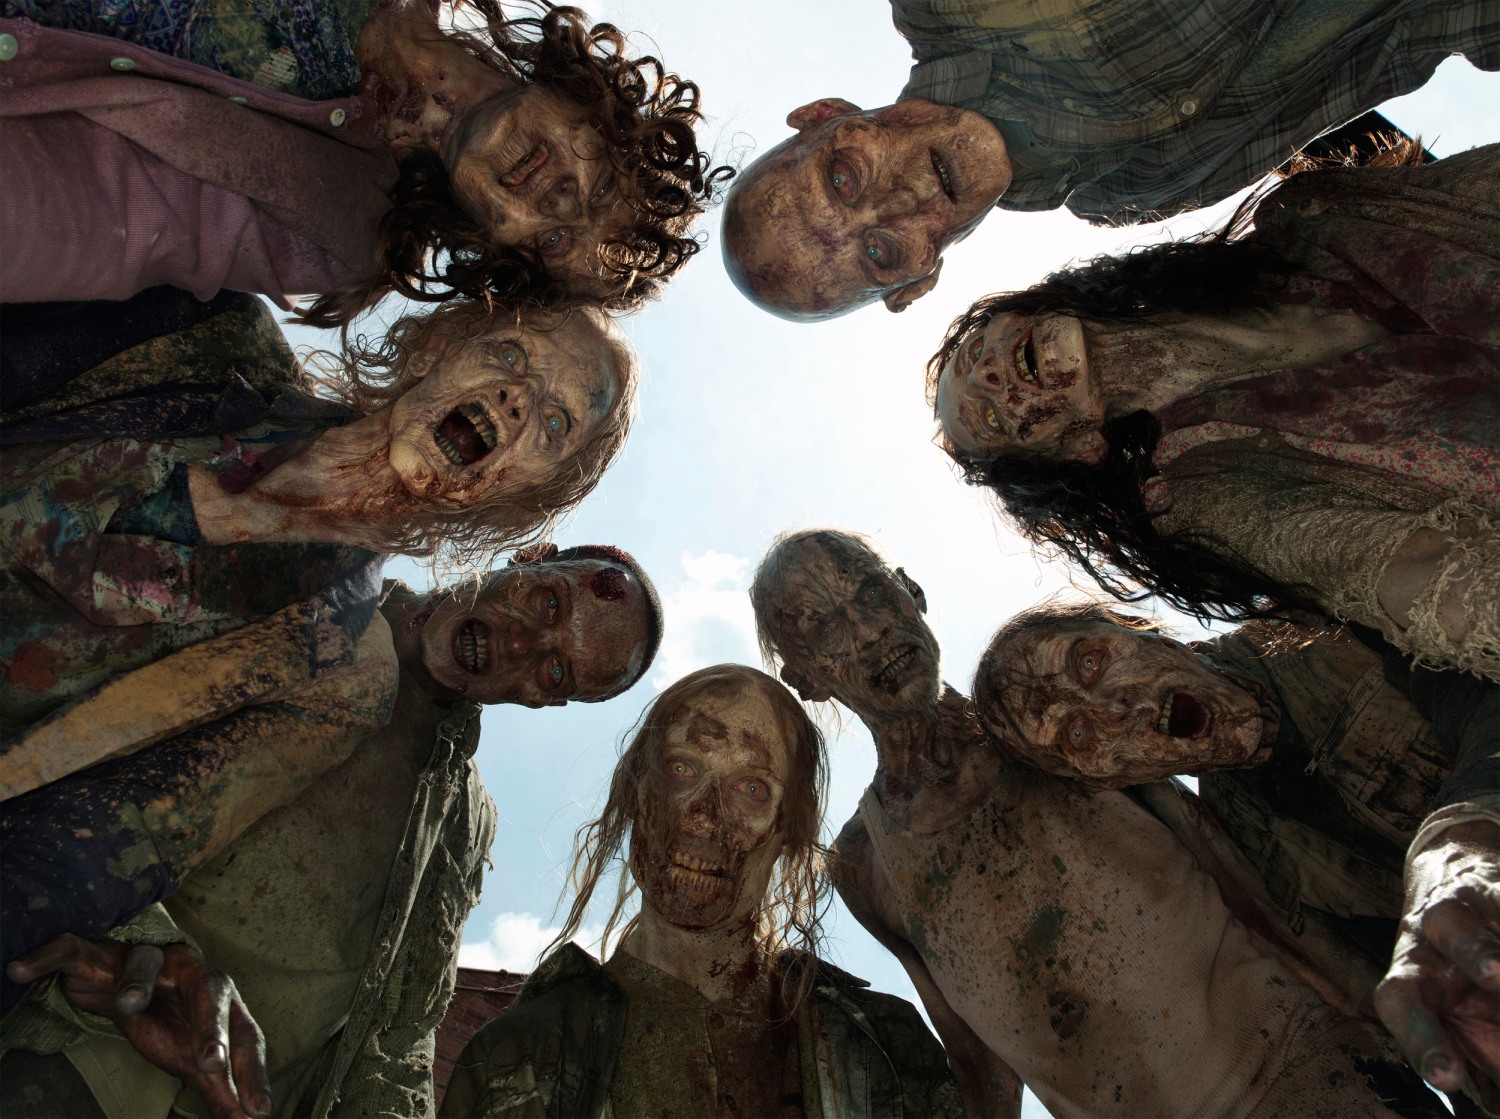 How COVID-19 Shaped a New Zombie Process on 'The Walking Dead